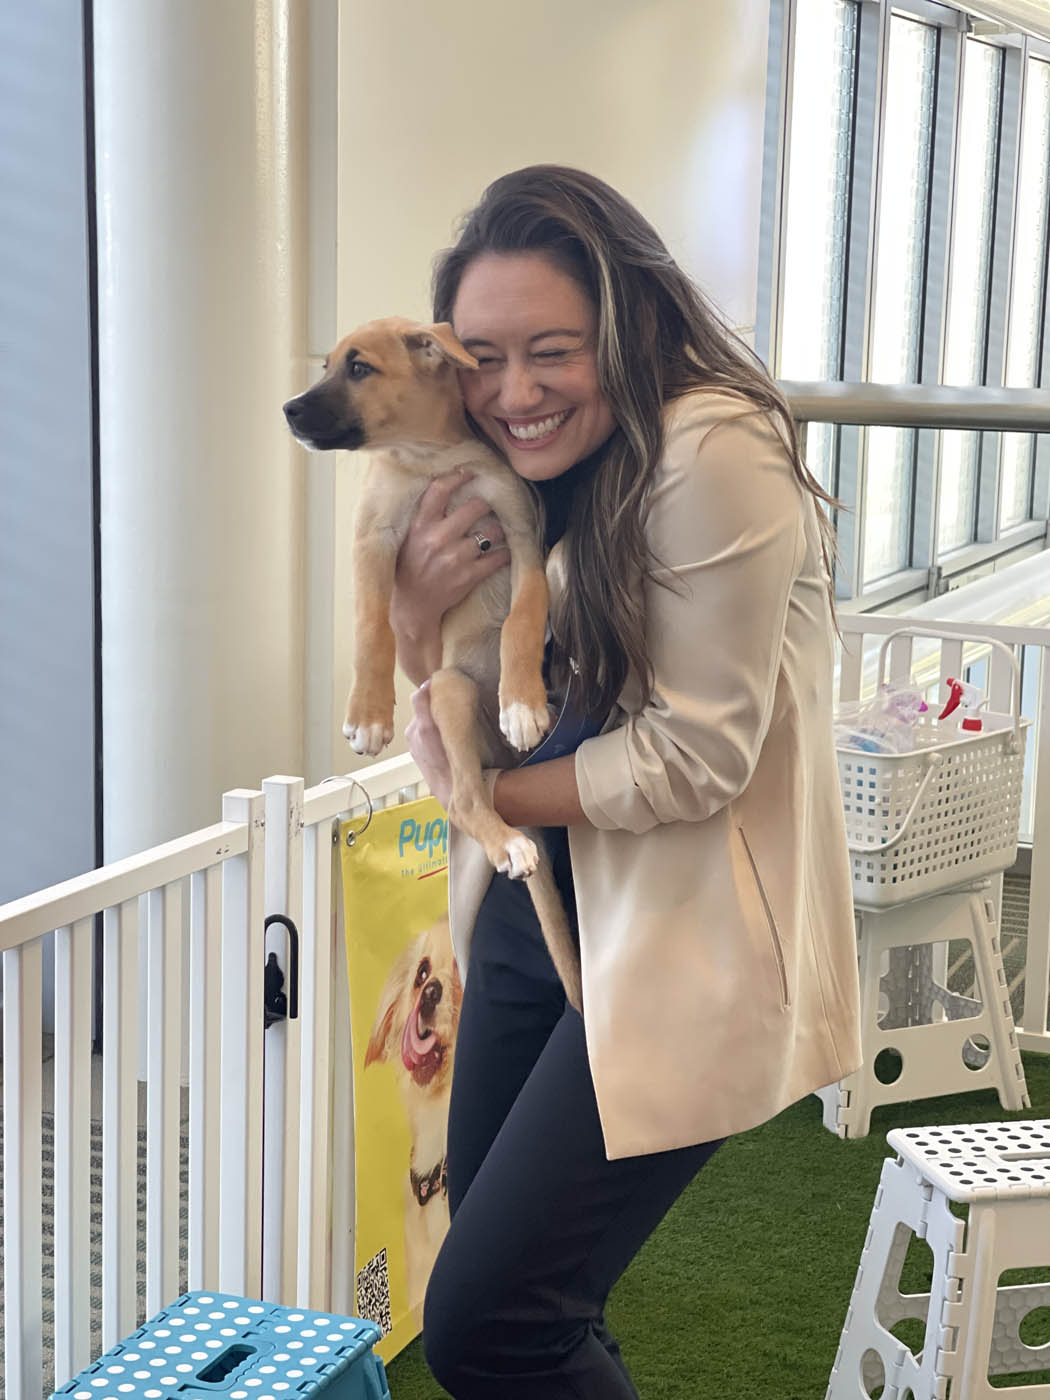 A woman holding a puppy and experiencing so much joy thanks to Puppy Love.